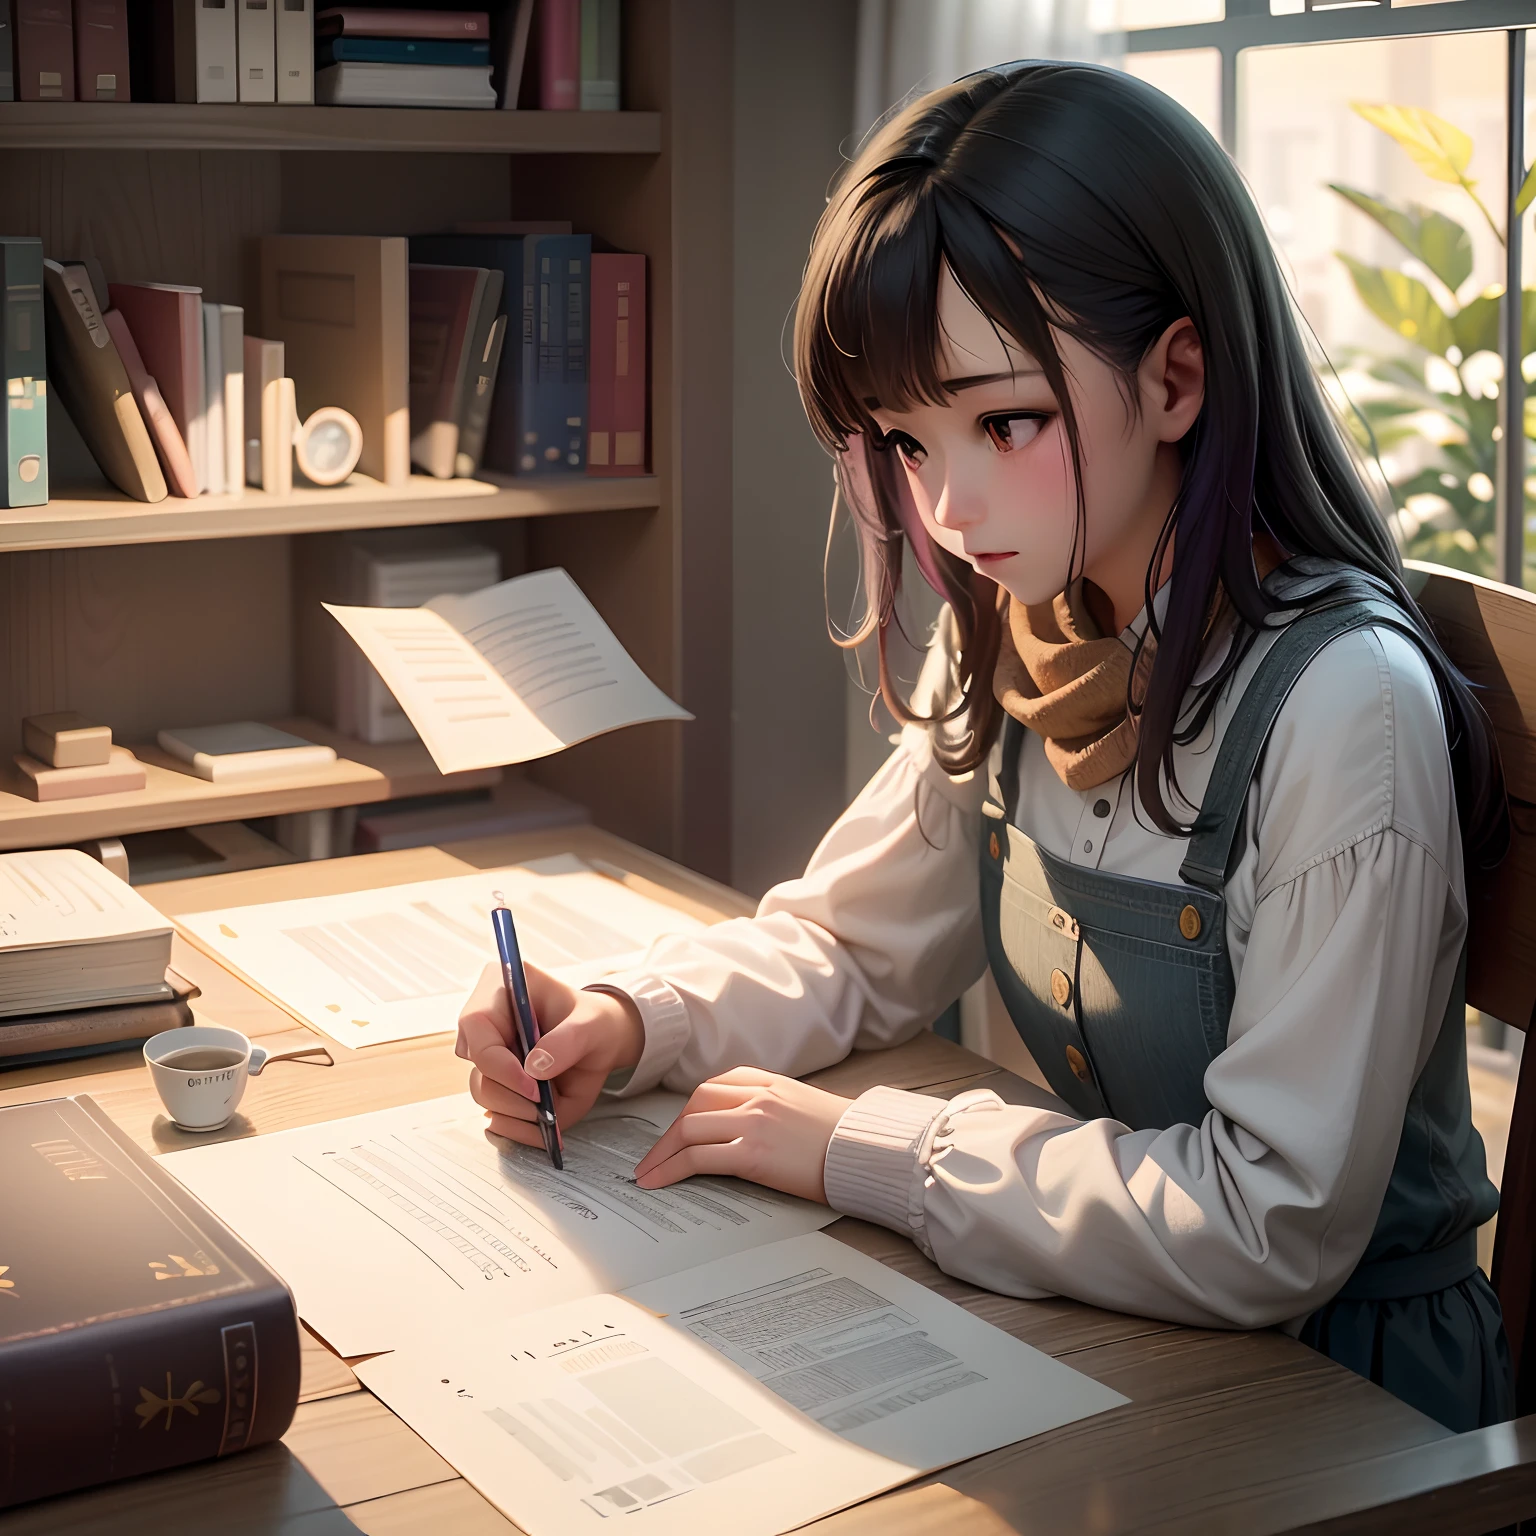 There was a young girl sitting at the table，Write on a piece of paper。, trying to study, research, Realistic cute girl painting, Realistic anime 3 D style, up of young anime girl, Realistic young anime girl, Makoto Shinkai. a digital rendering, anime realism style, realistic anime artstyle, Realistic anime art style, Beautiful illustration, Anime realism, Photorealistic anime